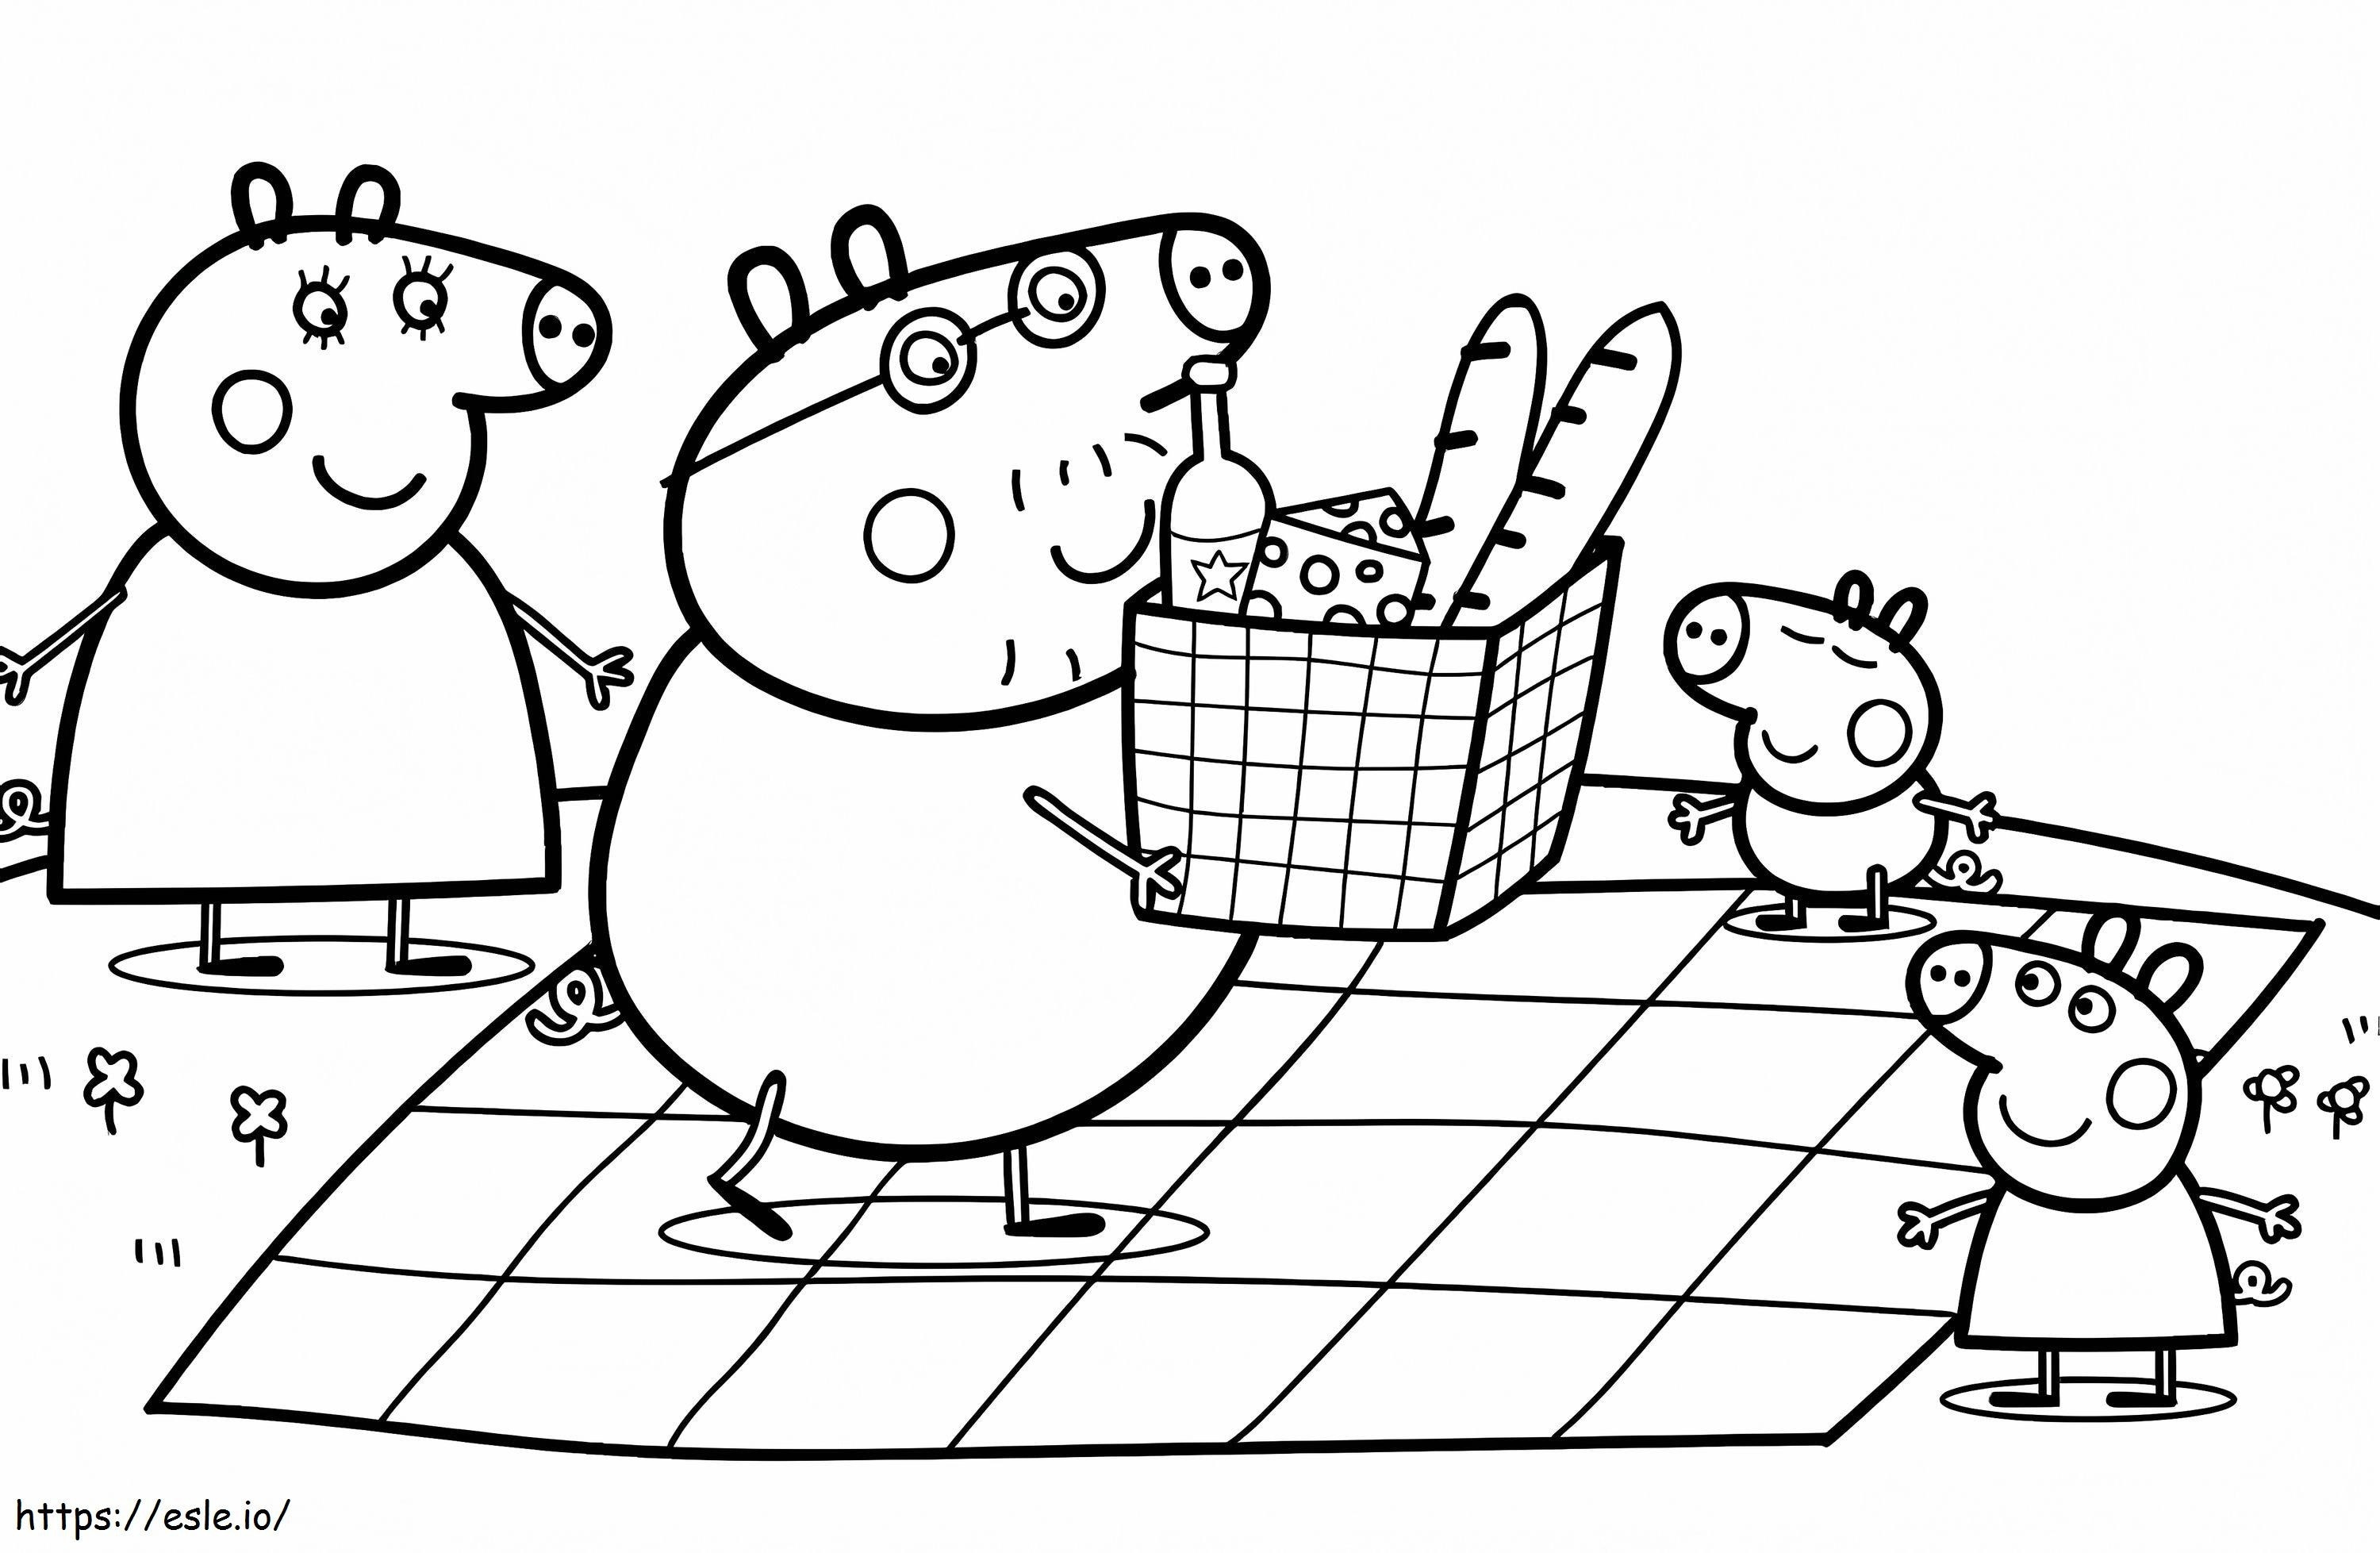 Peppa Pig Family Going On Picnic coloring page